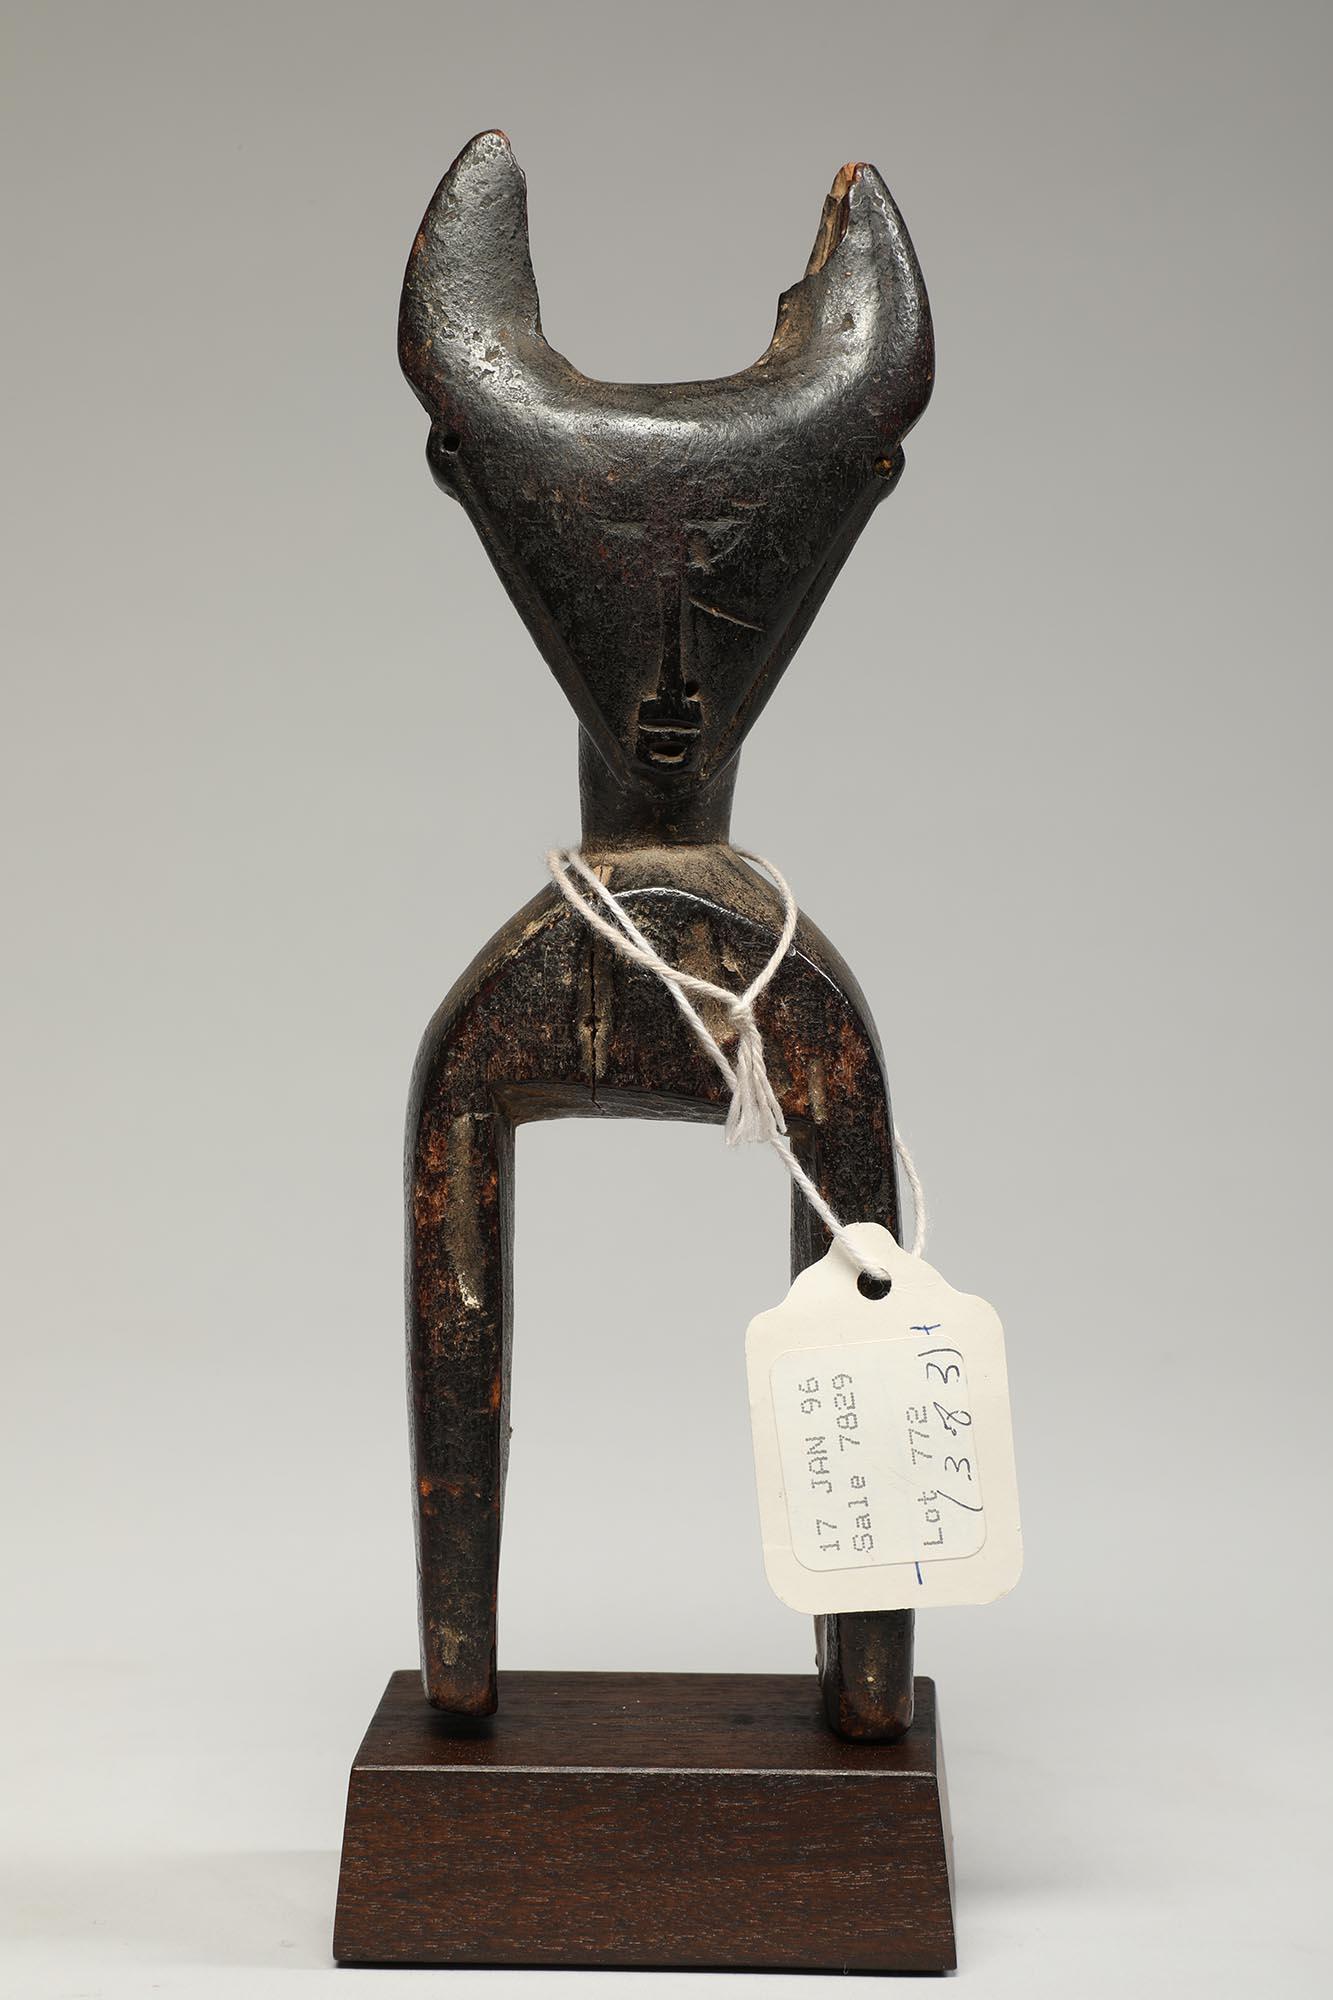 Finely carved wood heddle pulley from the Djimini in Cote d'Ivoire, Africa. With a sublime subtle carved face representing a human/ antelope or bush cow. Deep patina and heavy wear from traditional tribal use. Ex private collection Denver, acquired